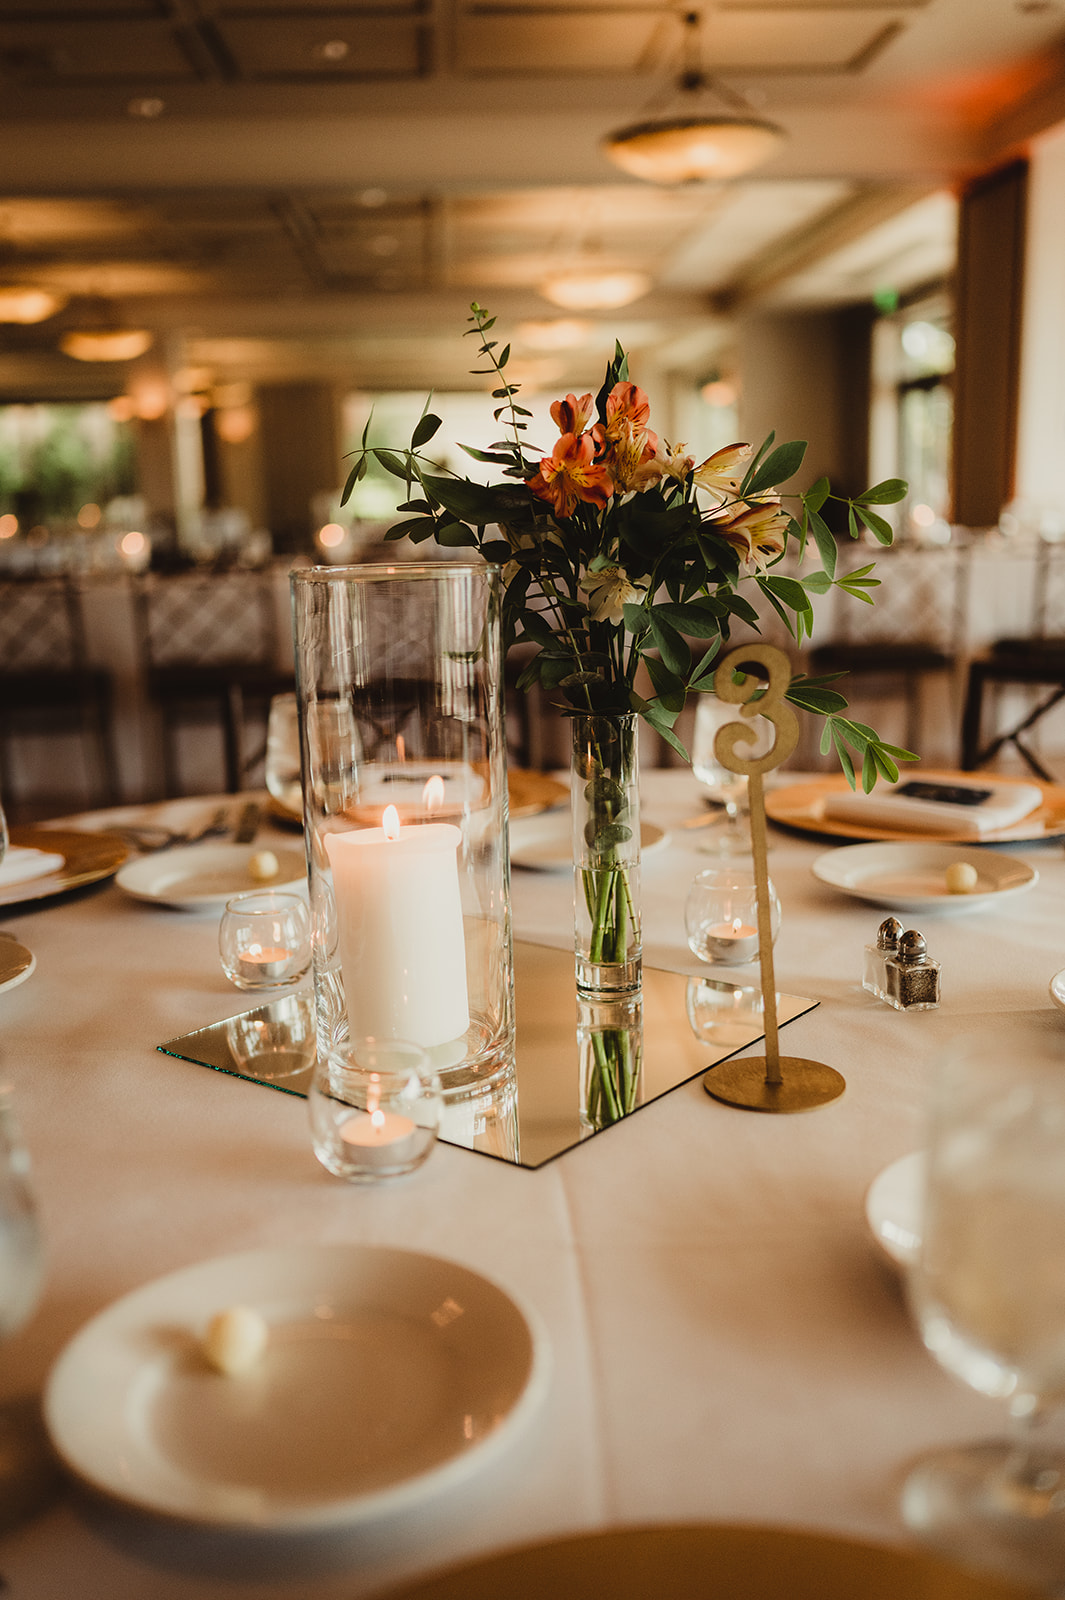 This gorgeous table setting with tall floral centerpieces and candles is perfect reception inspiration for brides. Orange centerpiece Reception table setting Wedding reception inspo #weddinginspiration #weddingplanning #diywedding #wisconsinweddingphotographer #armywedding